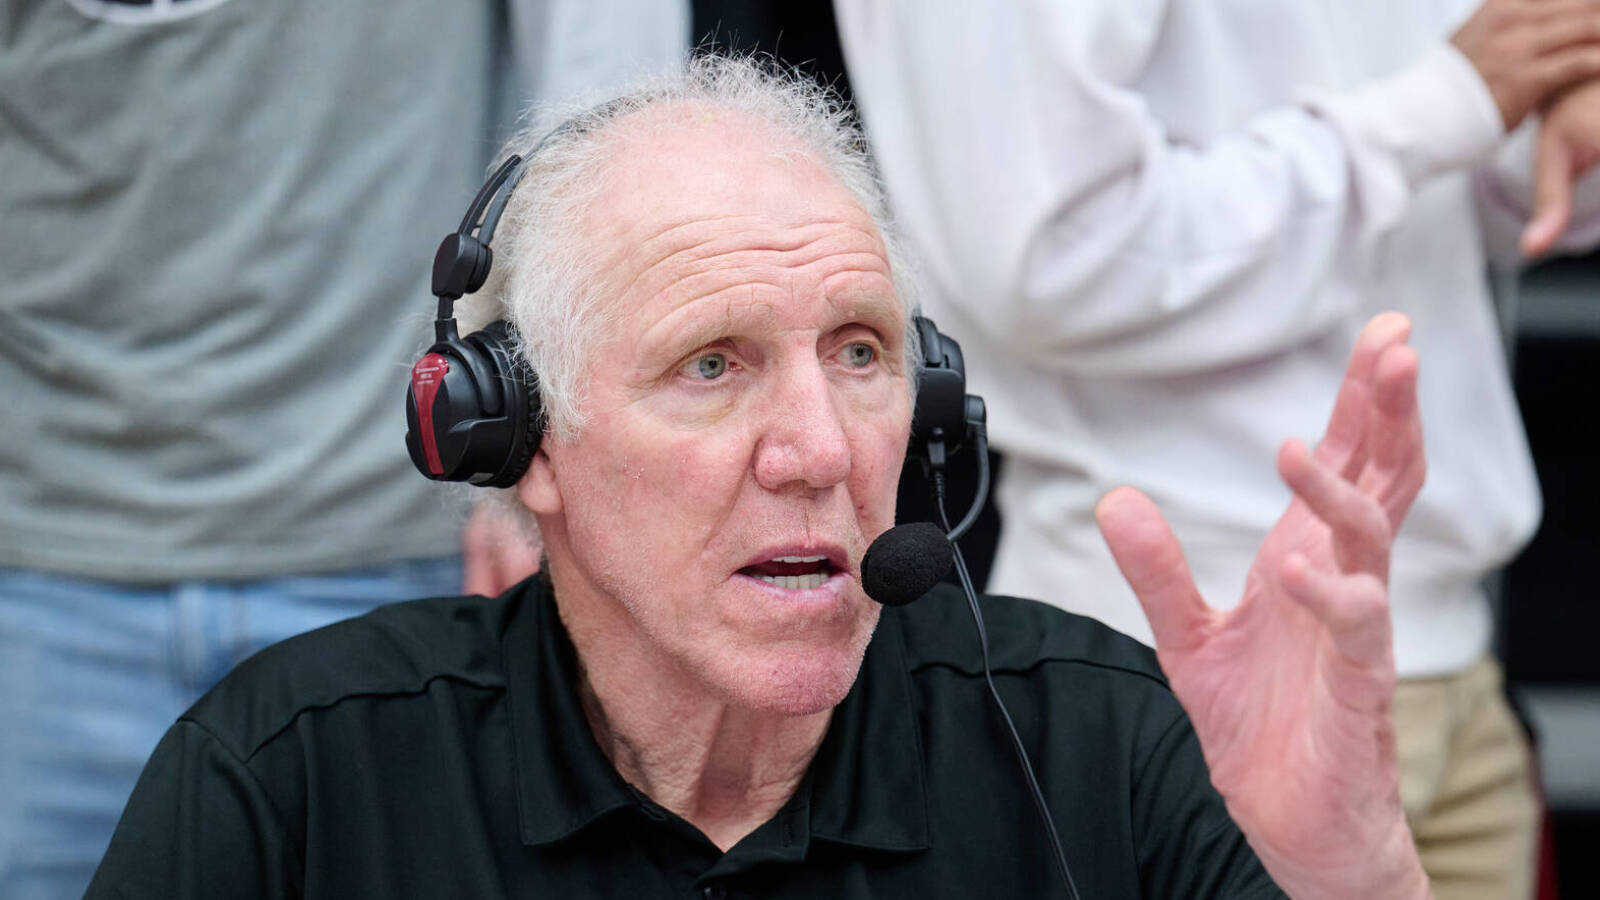 Clippers urged to retire Bill Walton's No. 32 jersey